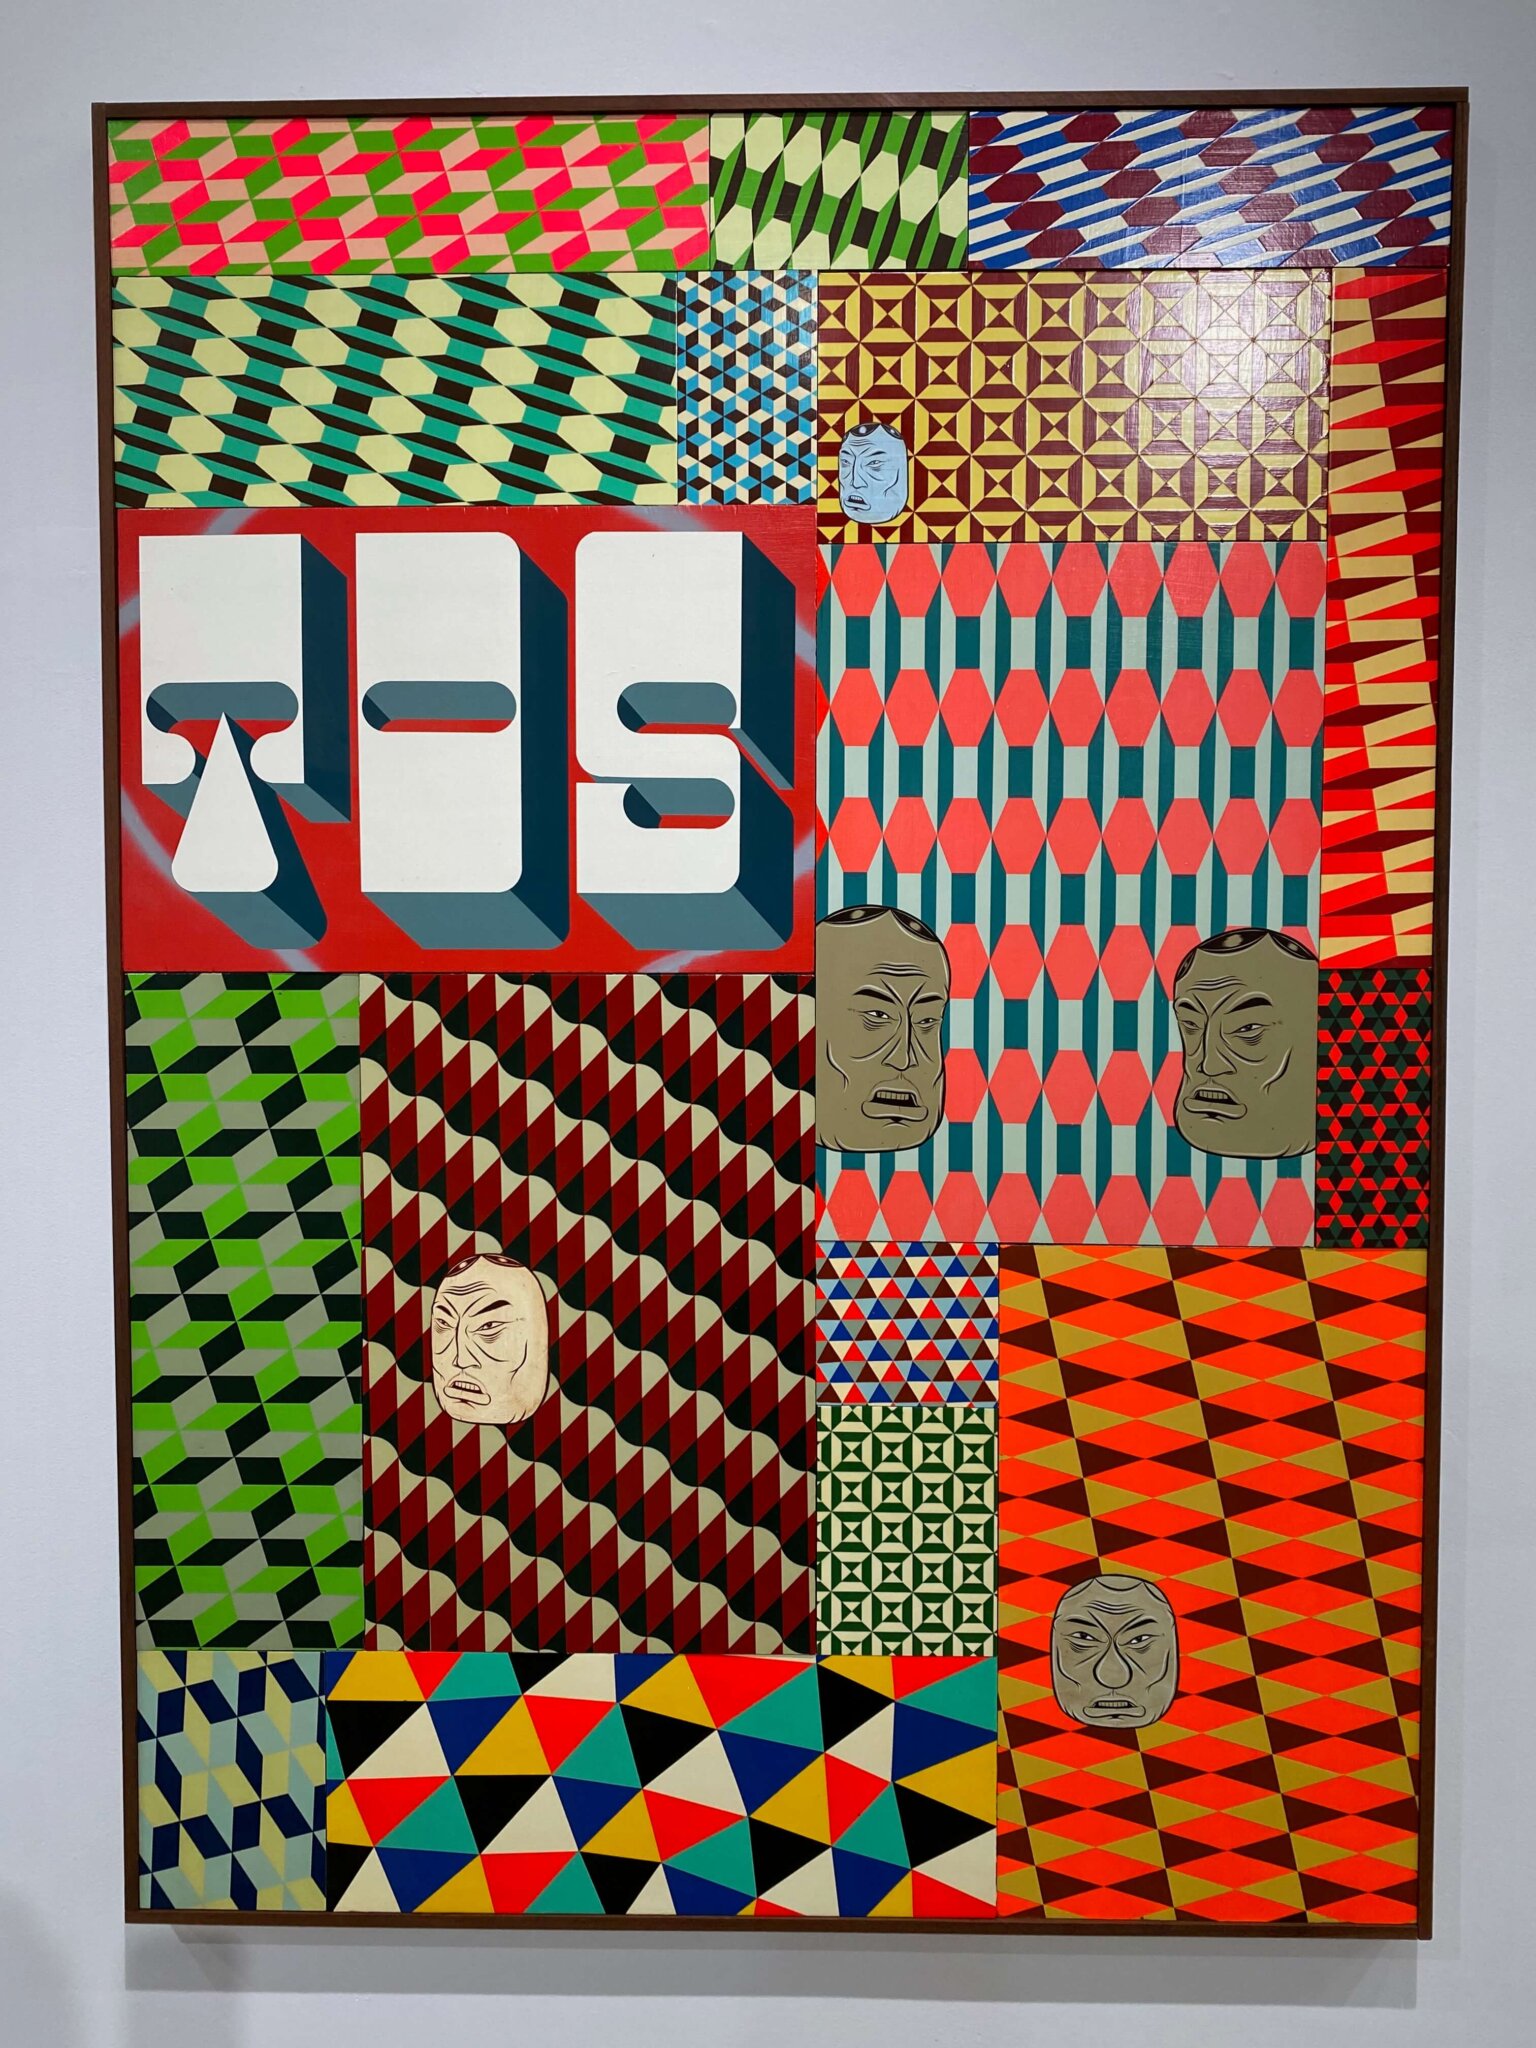 Untitled work by Barry McGee